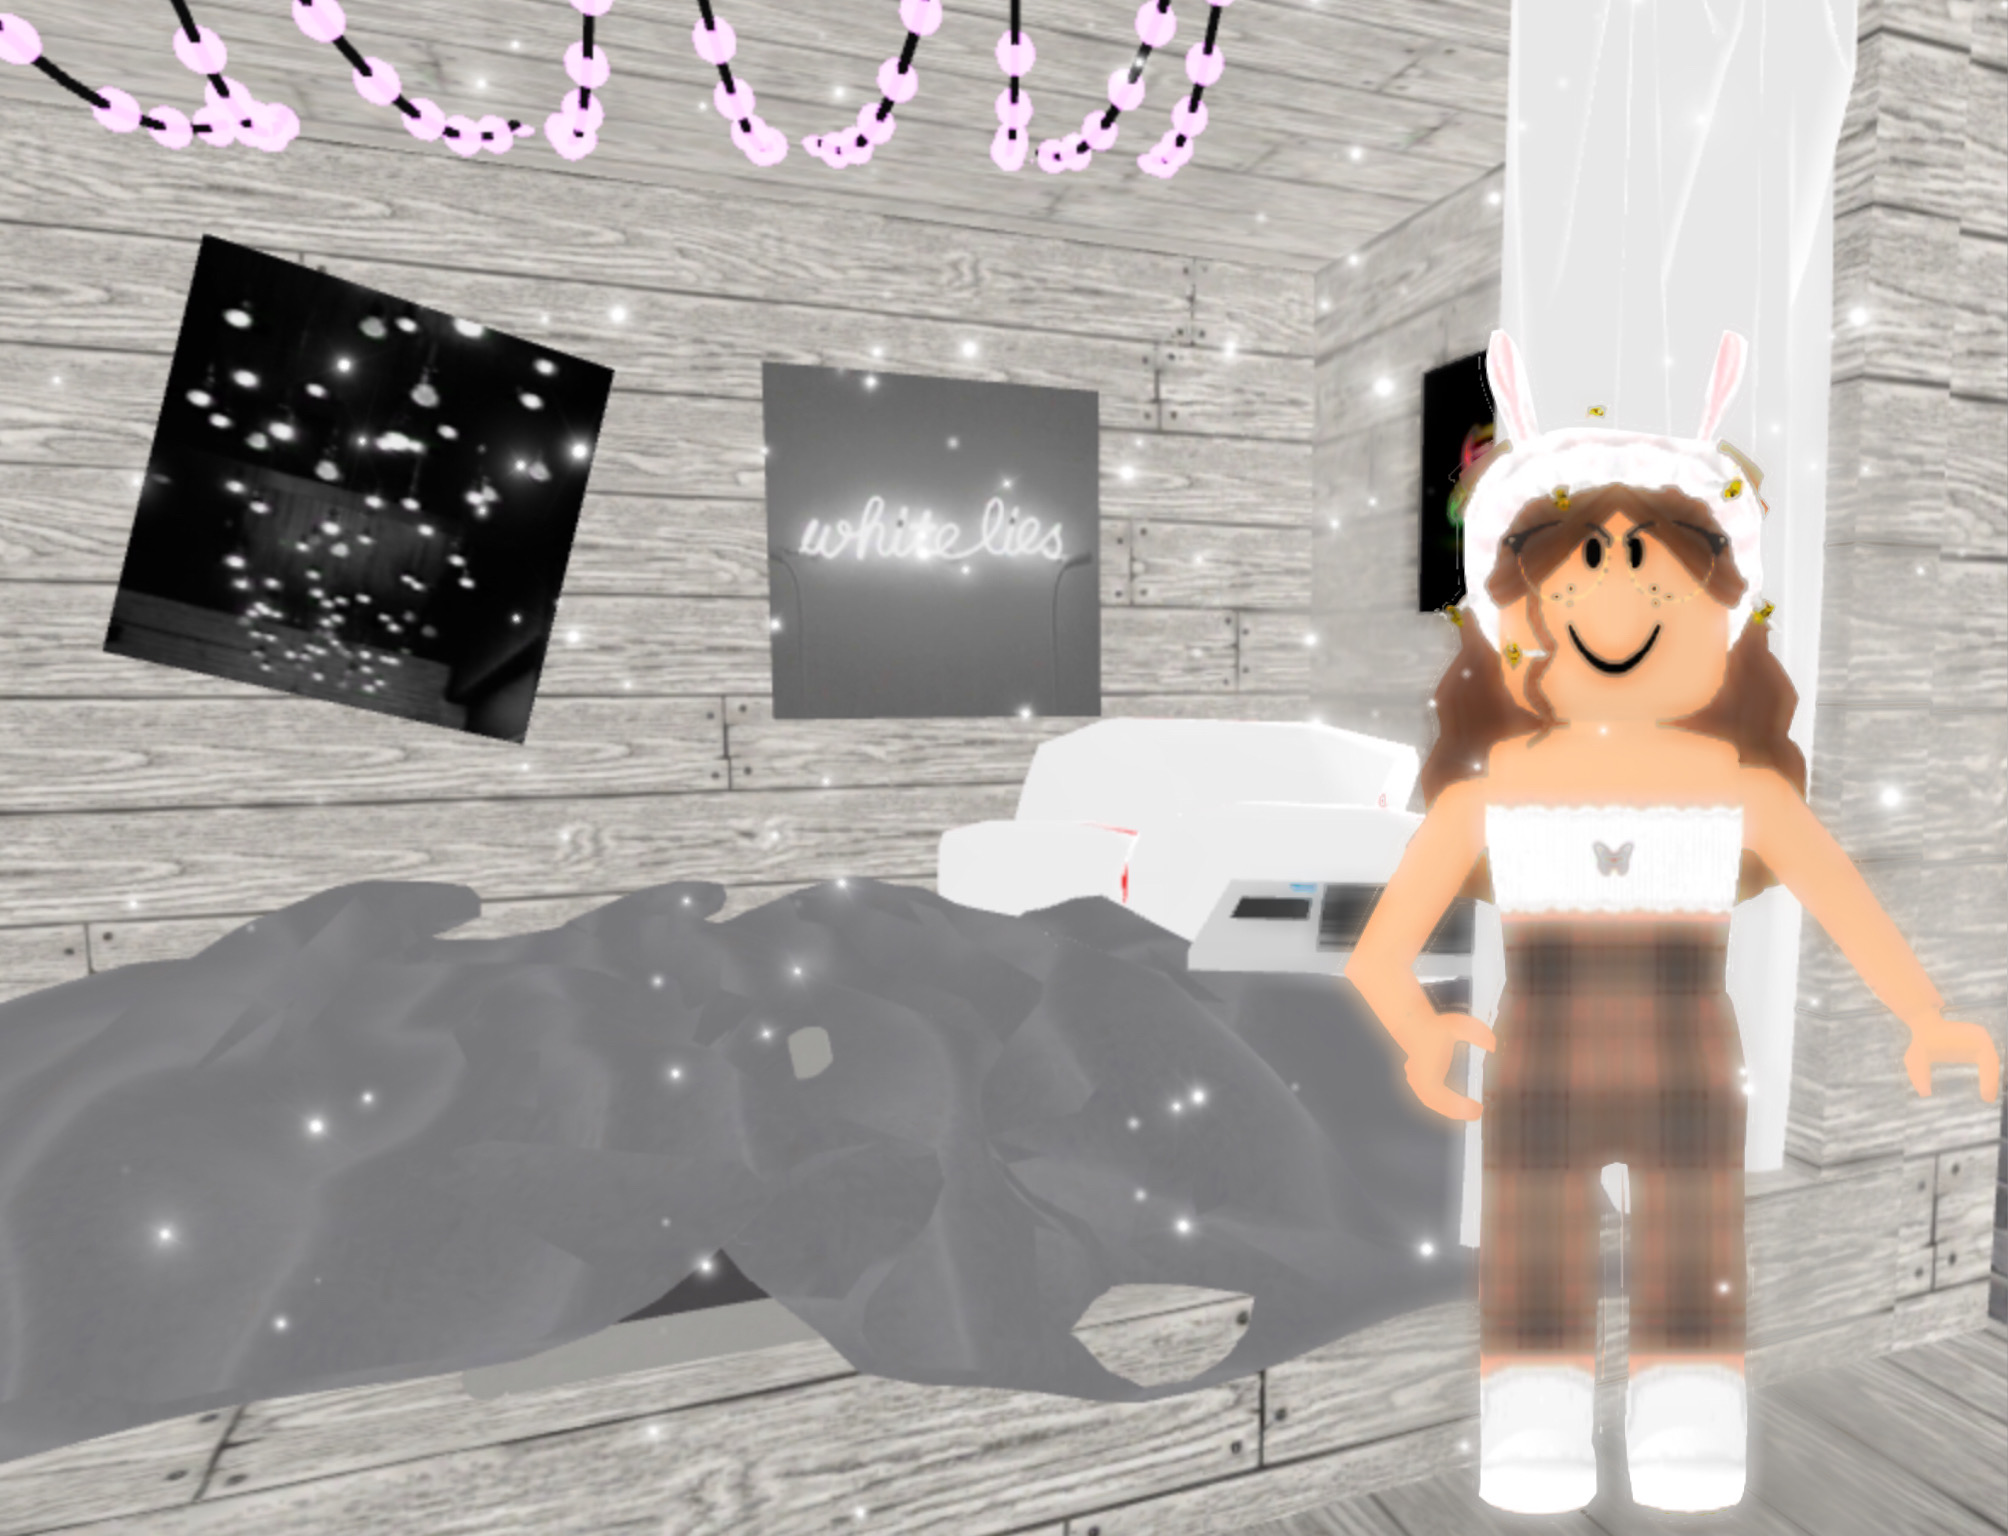 Roblox Gfx Bedroom Aestethics Image By Bob - how to make a roblox gfx with rooms